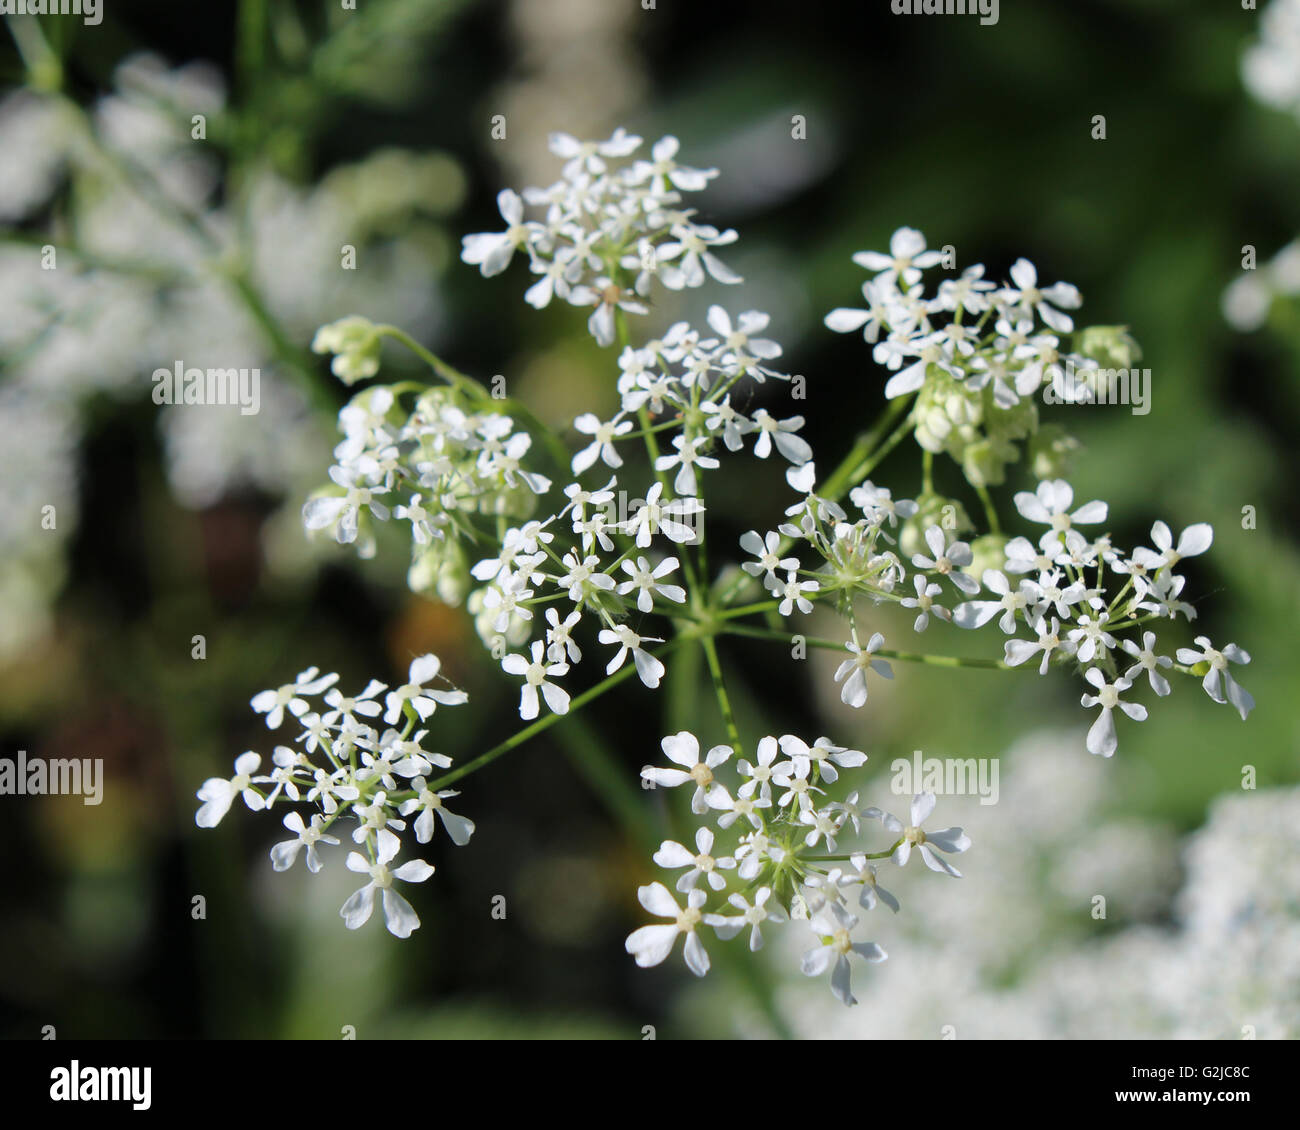 The dainty white flowers of Daucus carota also known as Wild Carrot or Queen Anne's Lace. Stock Photo